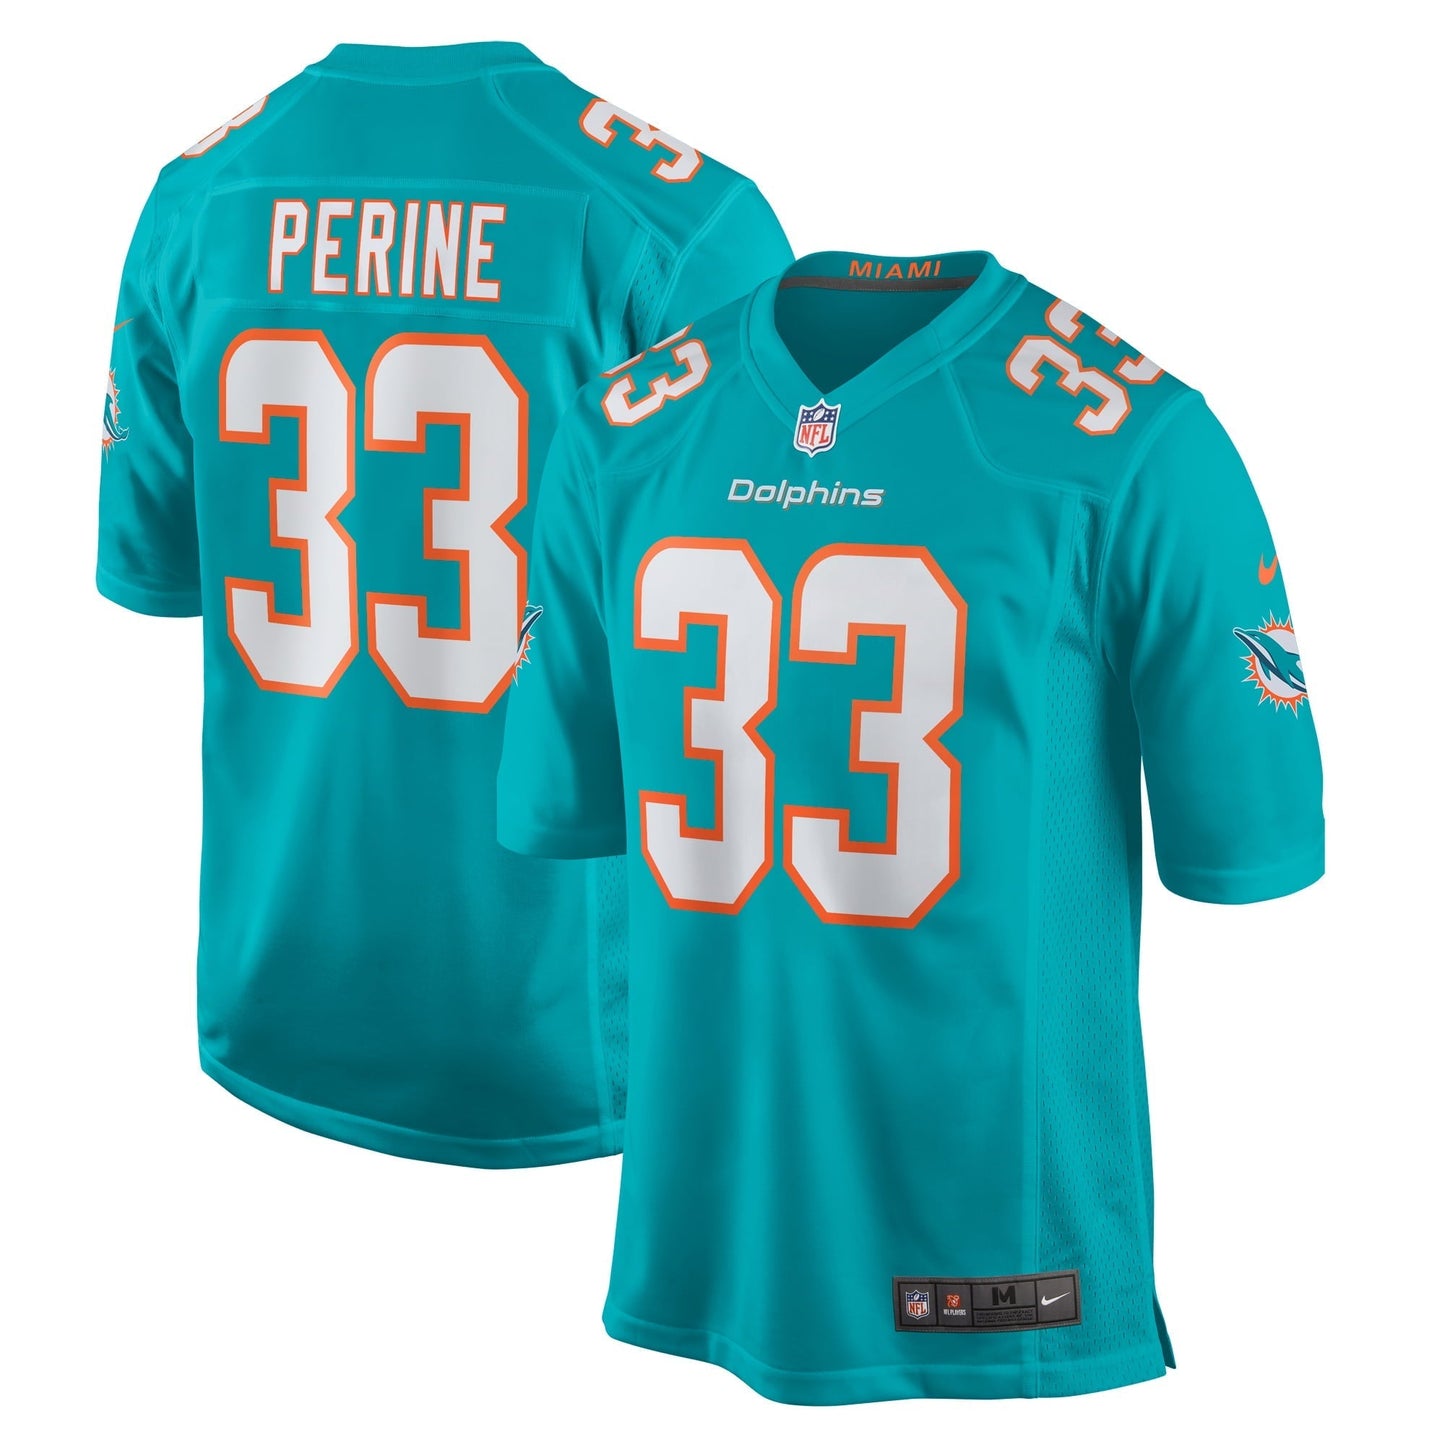 Women's Nike Miami Dolphins Home Game Player Jersey